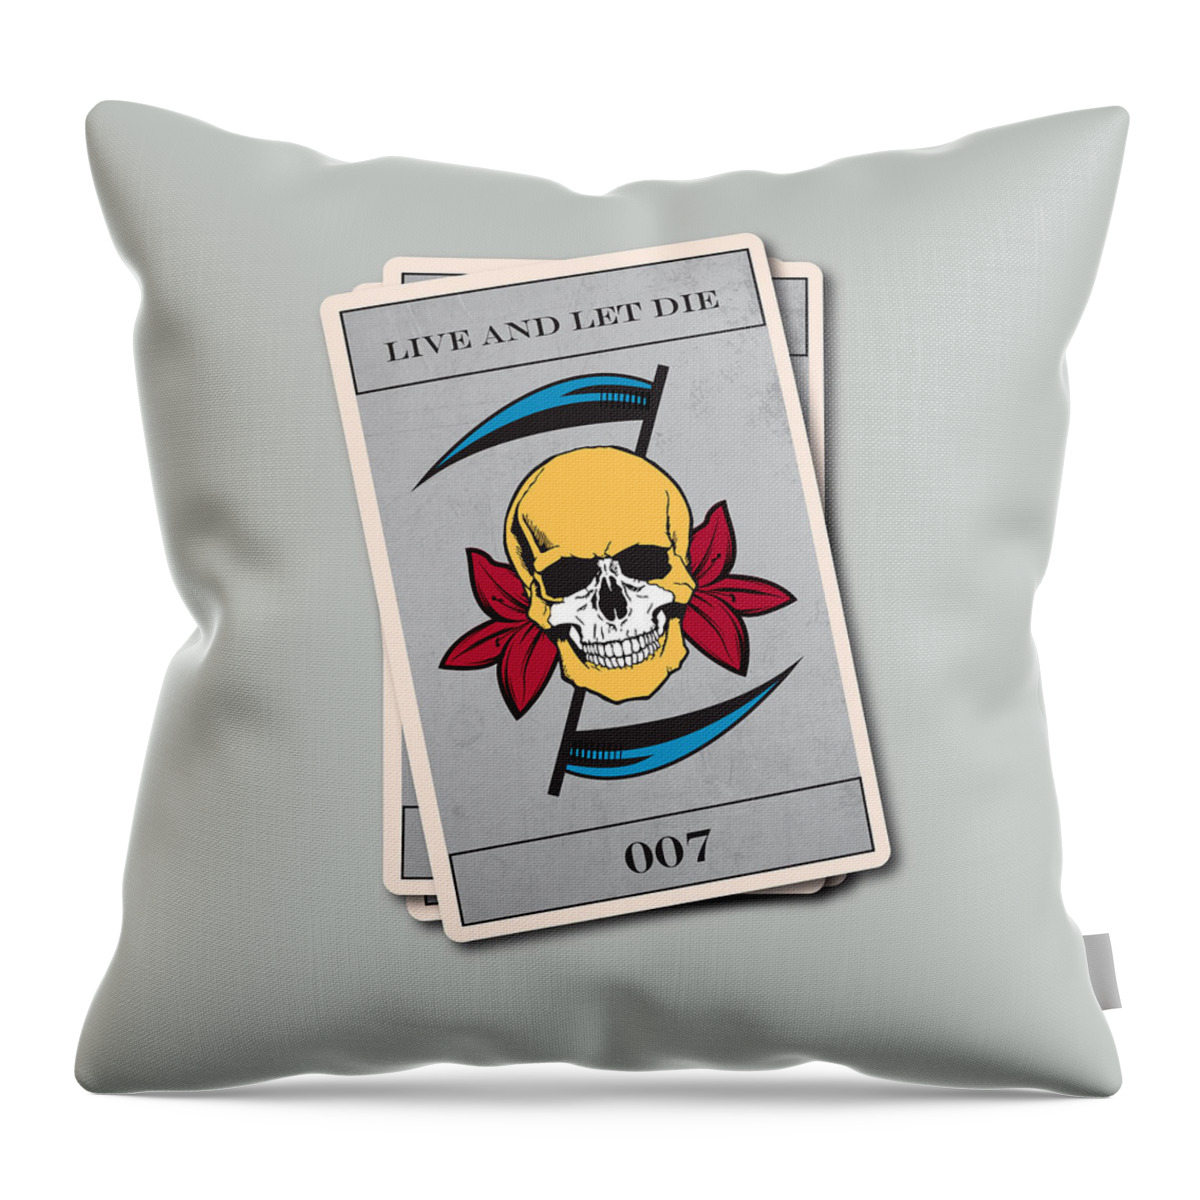 Live And Let Die Throw Pillow featuring the digital art Live and Let Die - Alternative Movie Poster by Movie Poster Boy